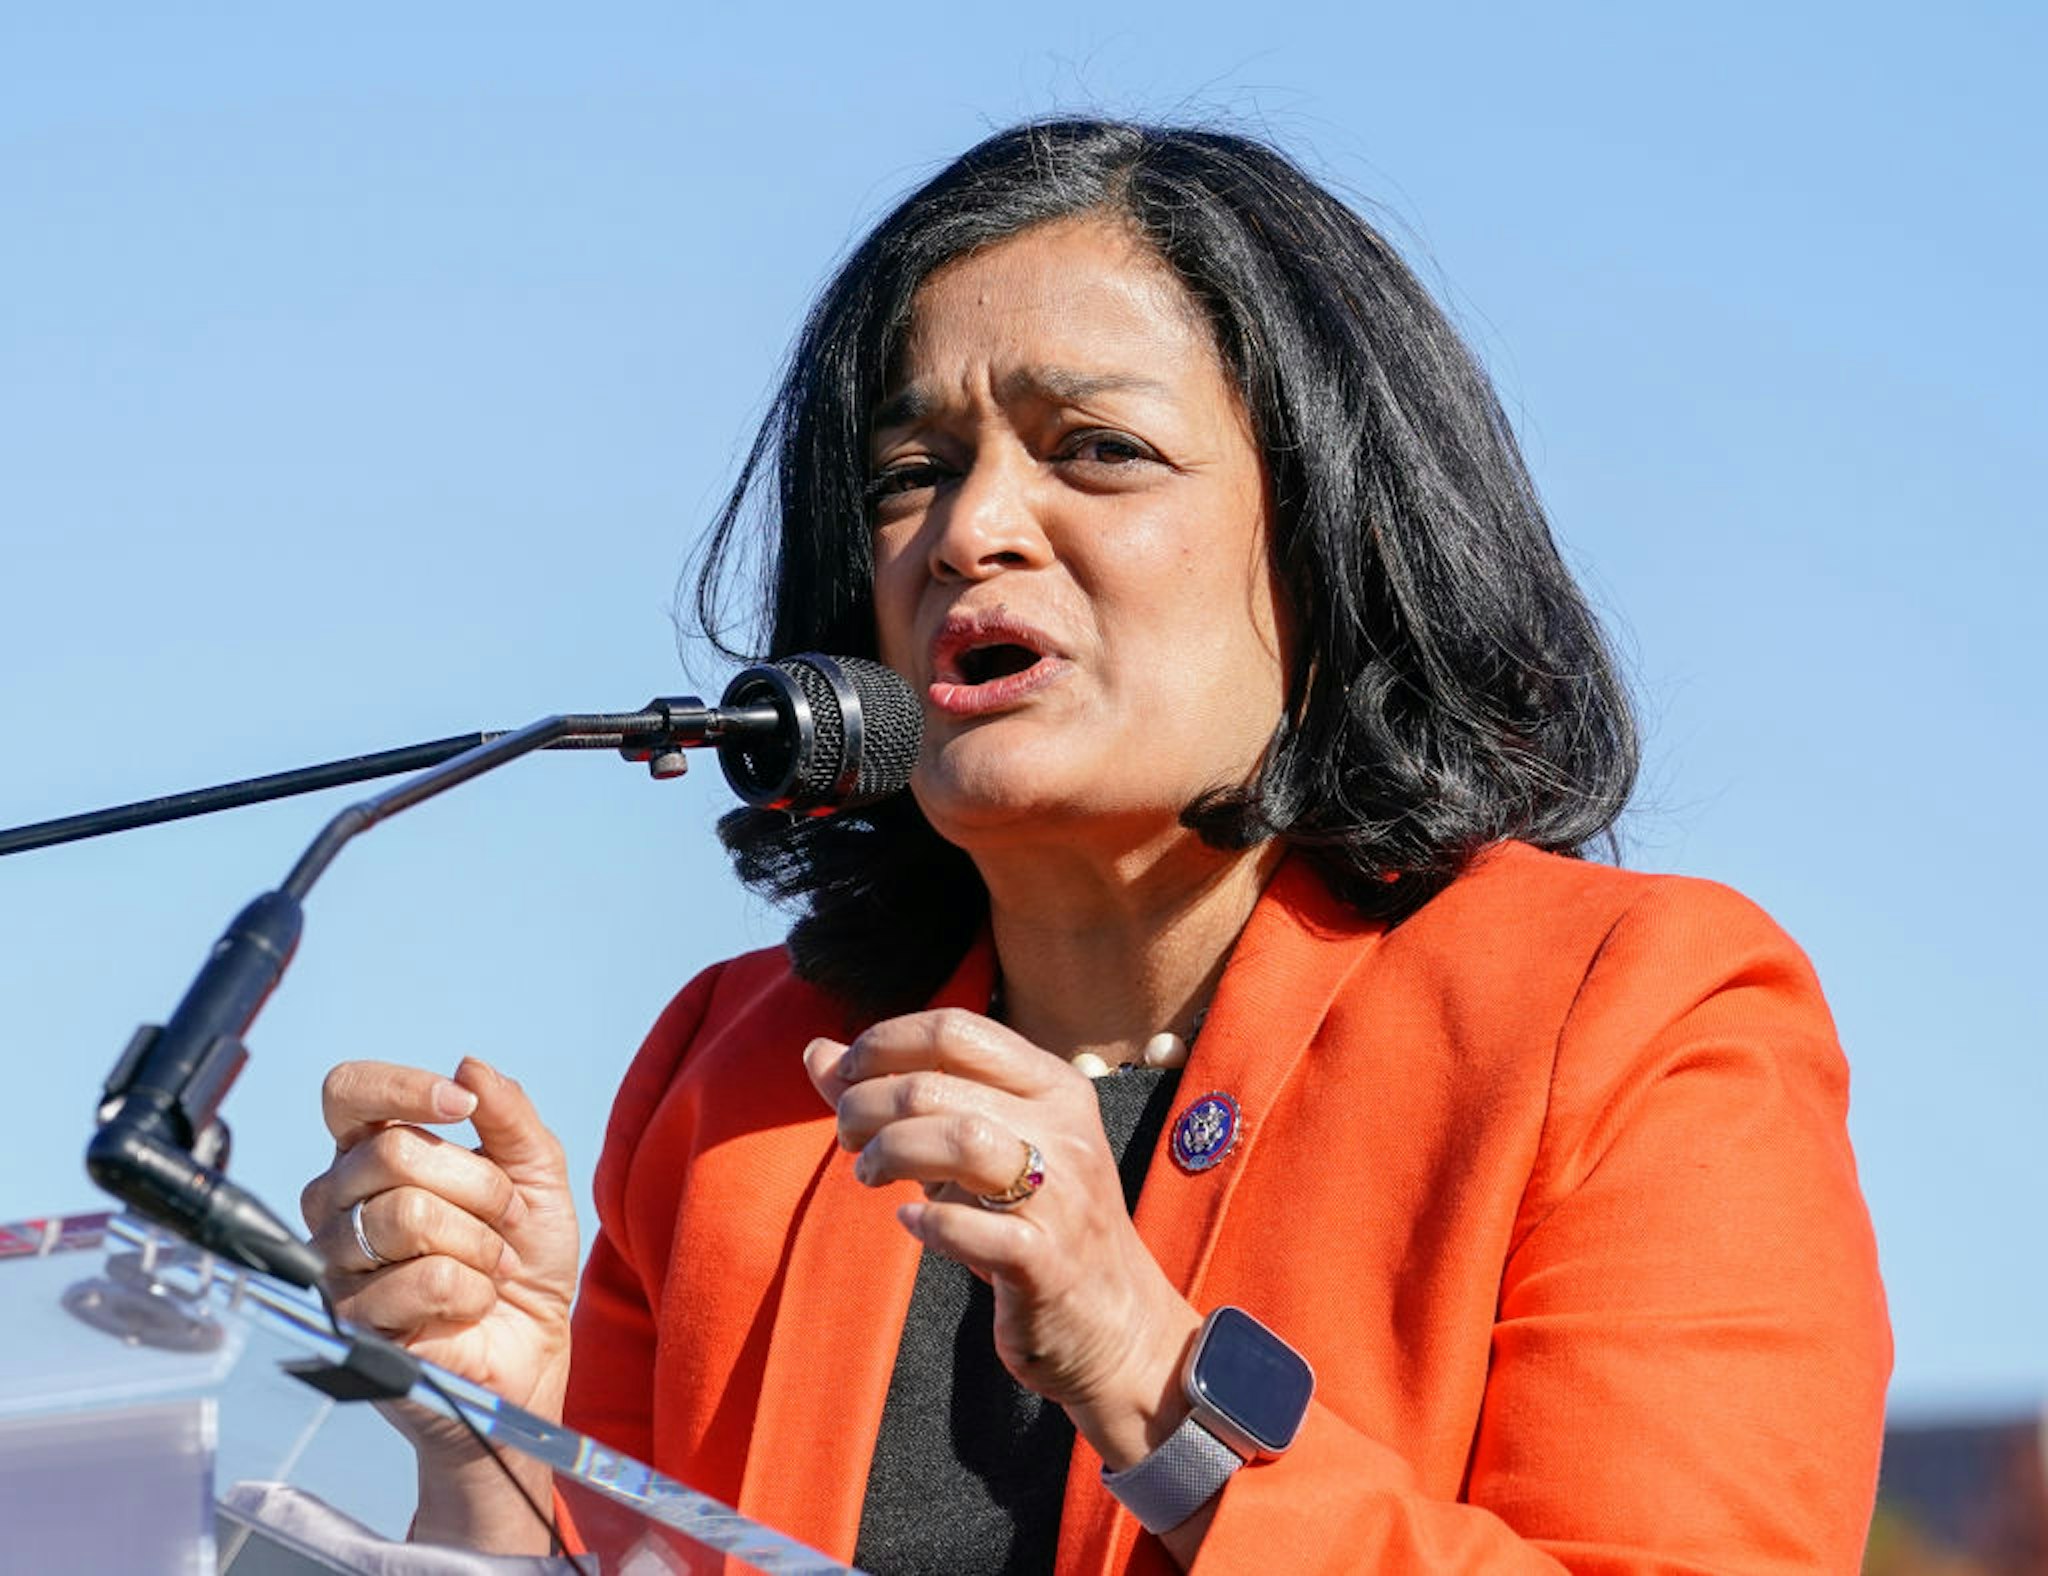 WASHINGTON, DC - NOVEMBER 16: U.S. Rep. Pramila Jayapal (D-WA) speaks at the "Time to Deliver" Home Care Workers rally and march on November 16, 2021 in Washington, DC. (Photo by Jemal Countess/Getty Images for SEIU)